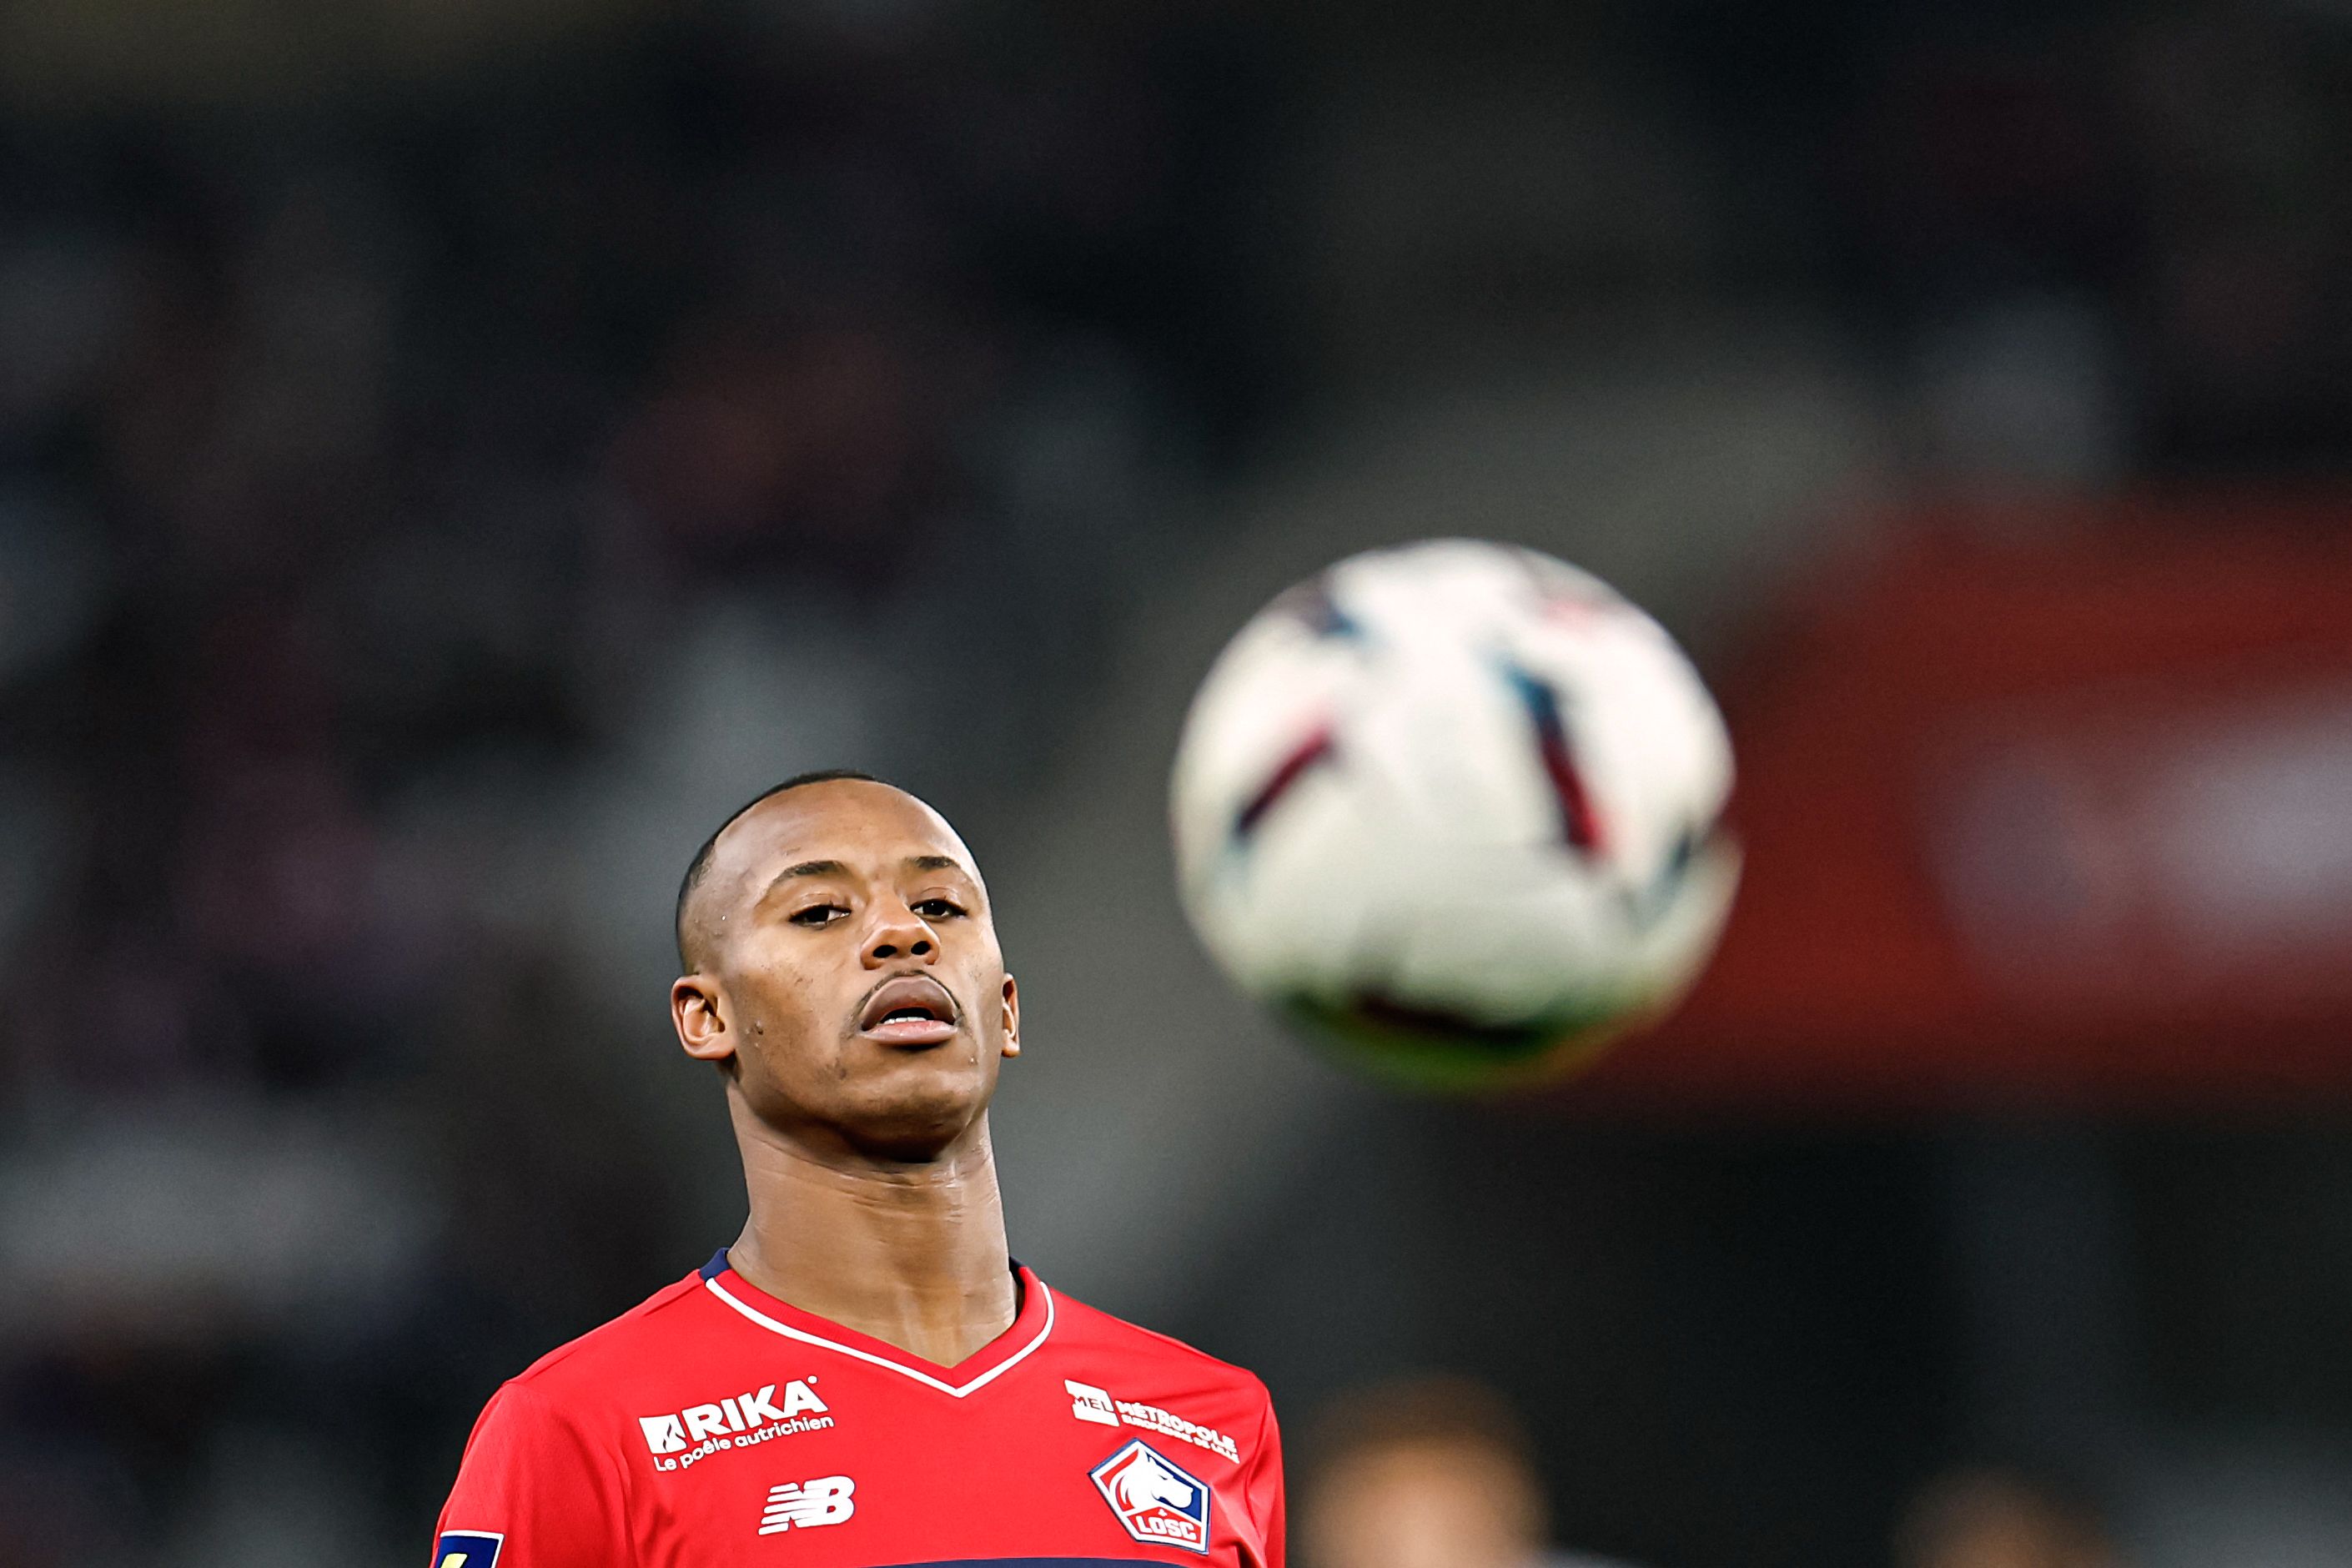 Lille's Portuguese defender Tiago Djalo eyes the ball during the French L1 football match between Lille LOSC and Clermont Foot 63 at Pierre-Mauroy stadium in Villeneuve-d'Ascq, northern France on February 1, 2023. (Photo by Sameer Al-DOUMY / AFP)